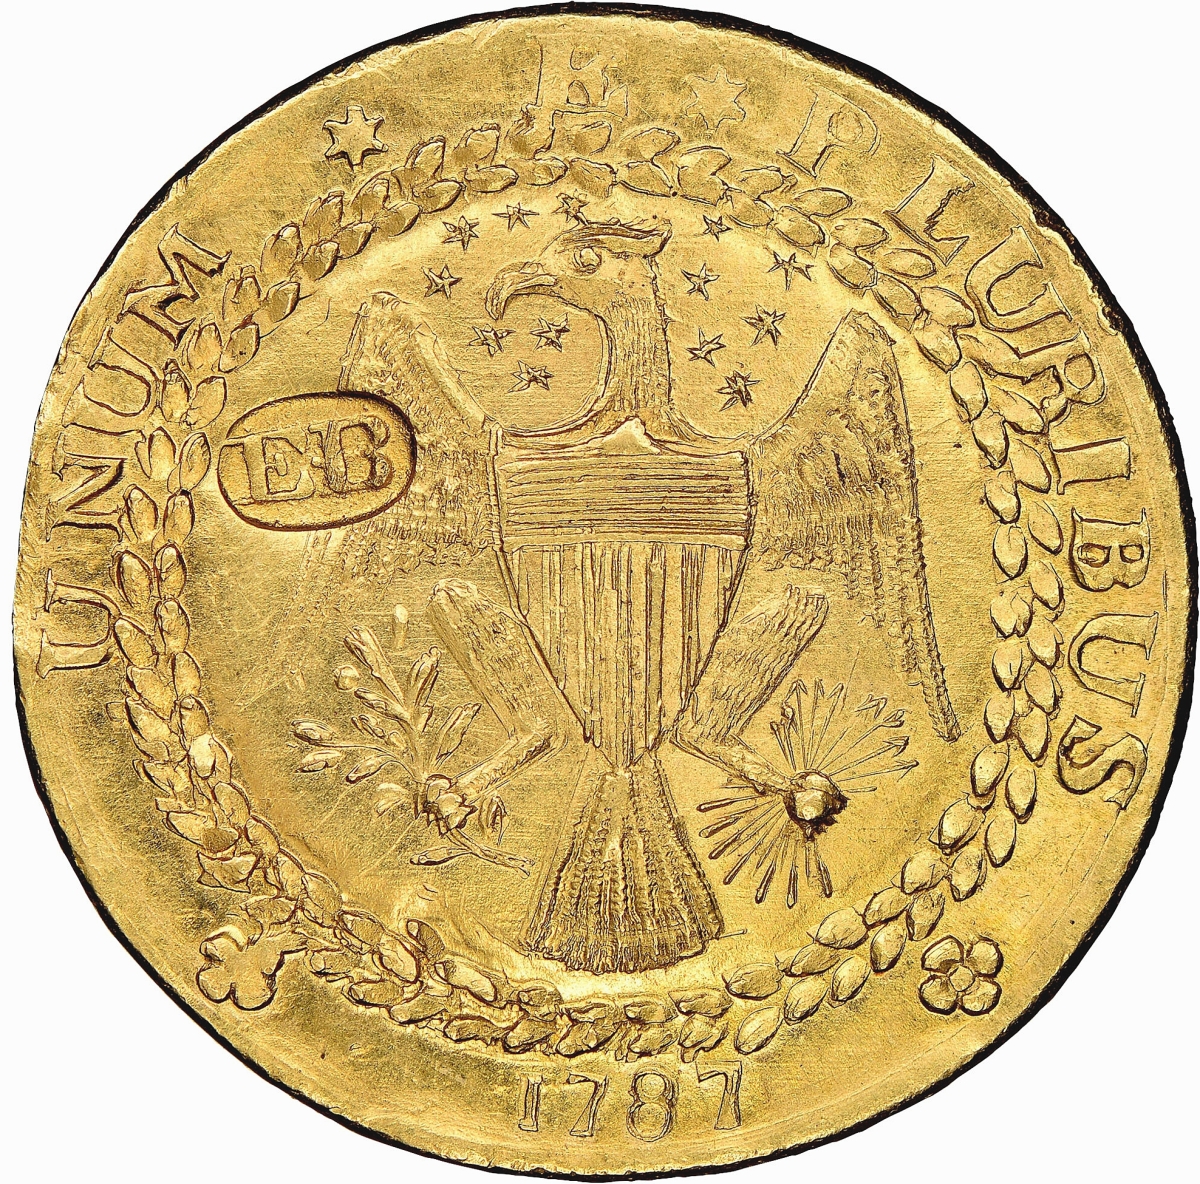 WHICH GOLD COINS ARE THE MOST VALUABLE?